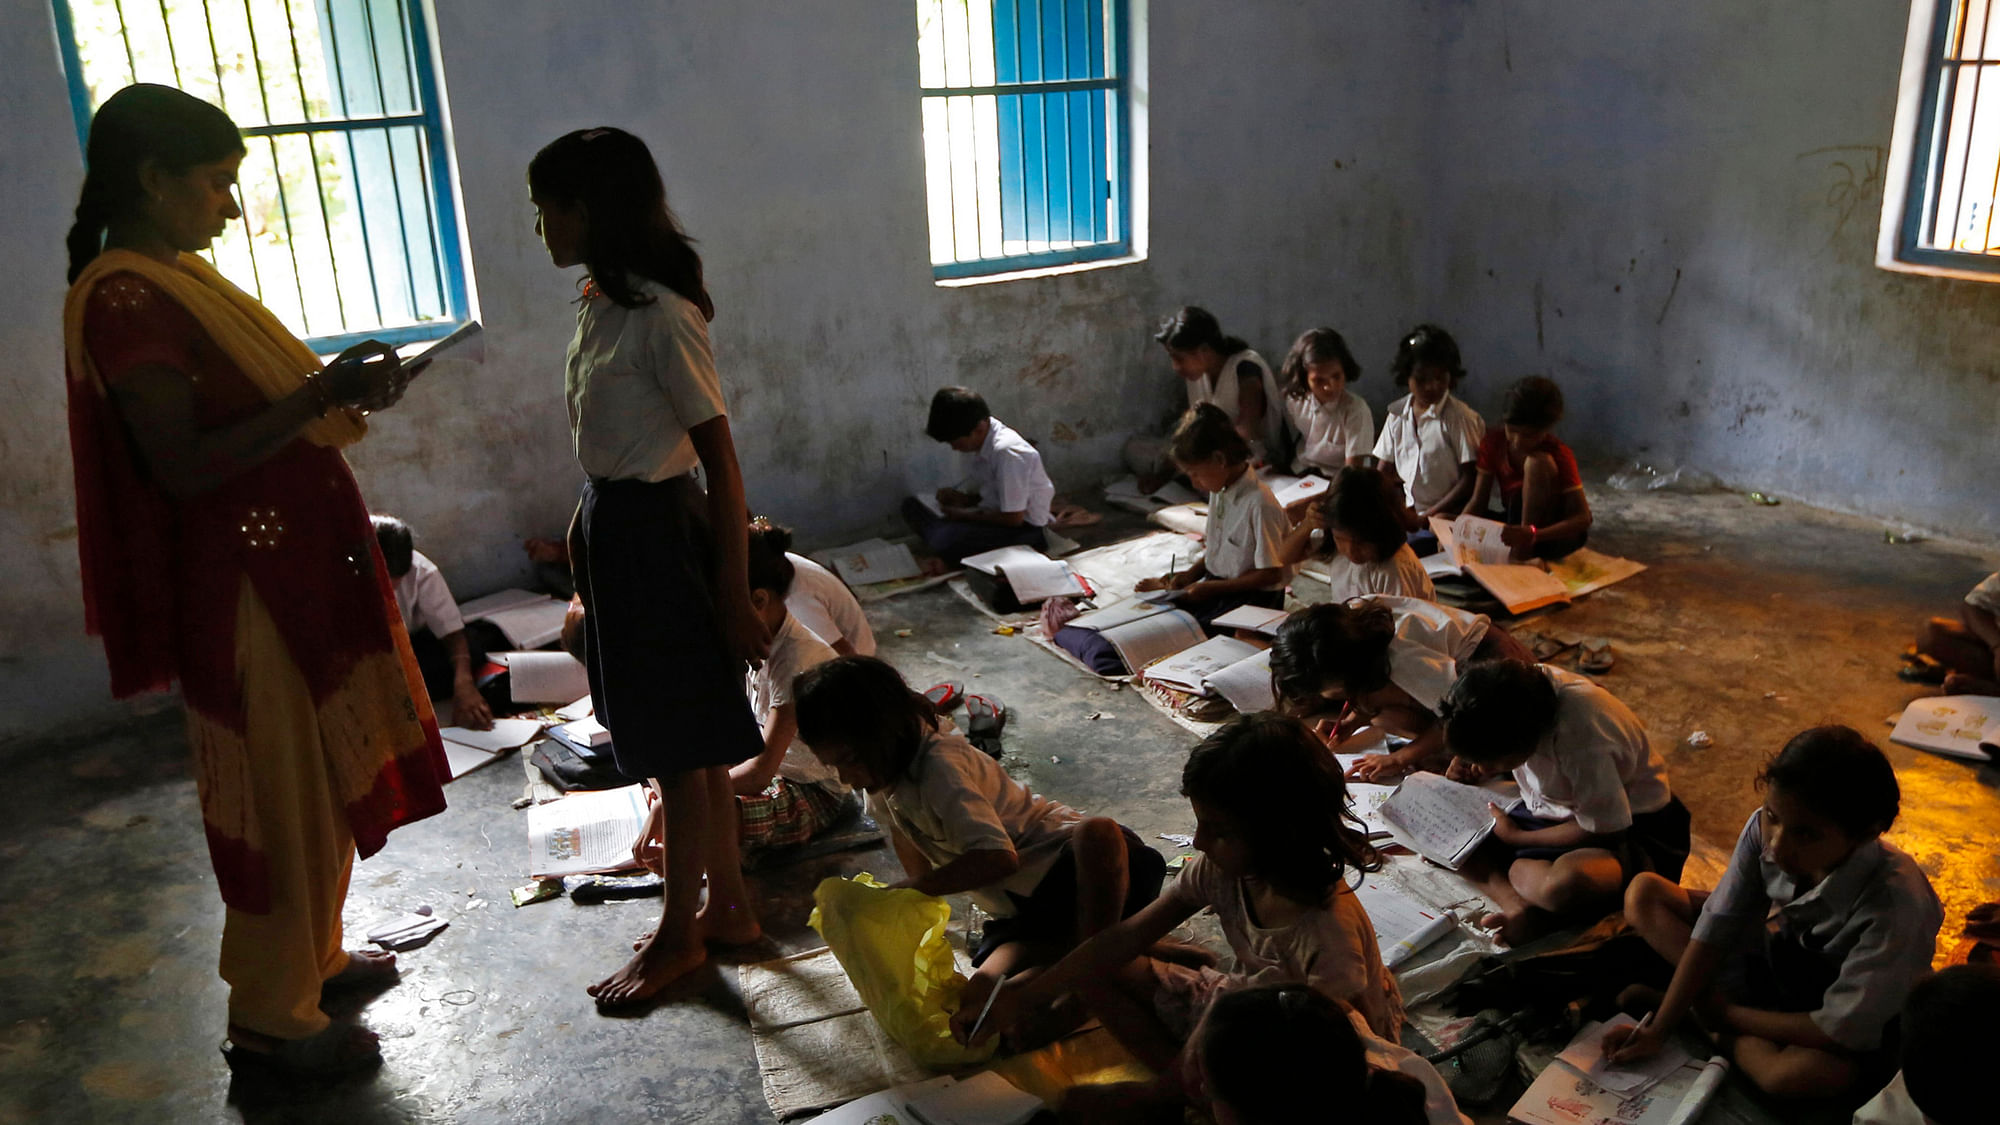 Schoolchildren study inside a classroom in Chapra district of Bihar. Image used for representational purposes.&nbsp;